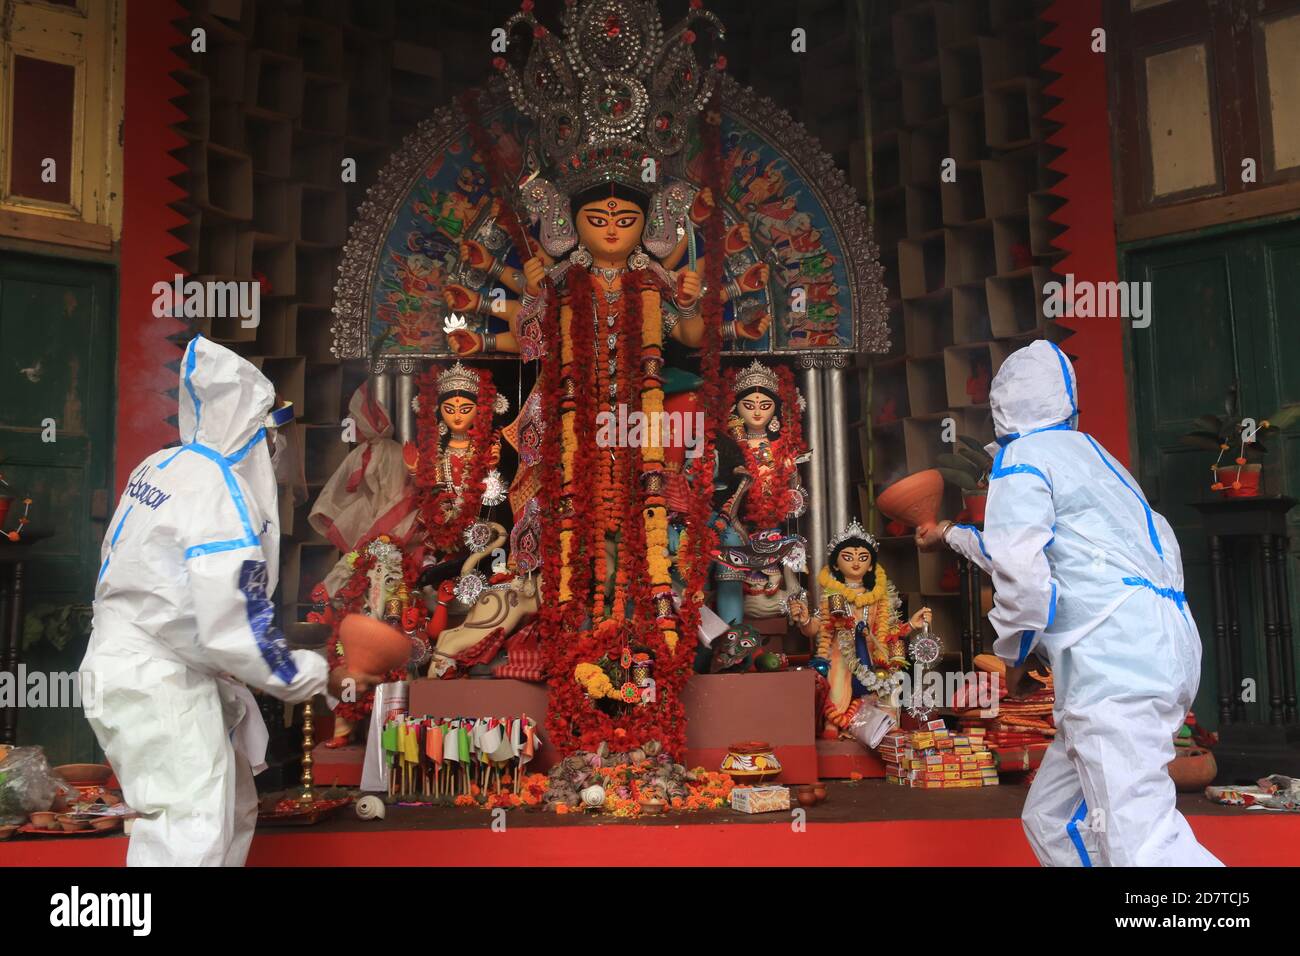 Kolkata, India. 25th Oct, 2020. Hindu devotees wearing PPE perform the traditional dance of Dhunuchi in front of Hindu goddess Durga idol during Durga Puja Festival in Kolkata. About 90 per cent of Covid patients have recovered in India so far, the Health Ministry said this morning, adding that the country has logged over 78.64 lakh cases since the beginning of the pandemic. In the last 24 hours, the country reported 50,129 new infections; 578 deaths in a day have pushed the total Covid-linked fatalities to 1, 18,534. India is the second worst-hit country in the world by the pandemic after the Stock Photo